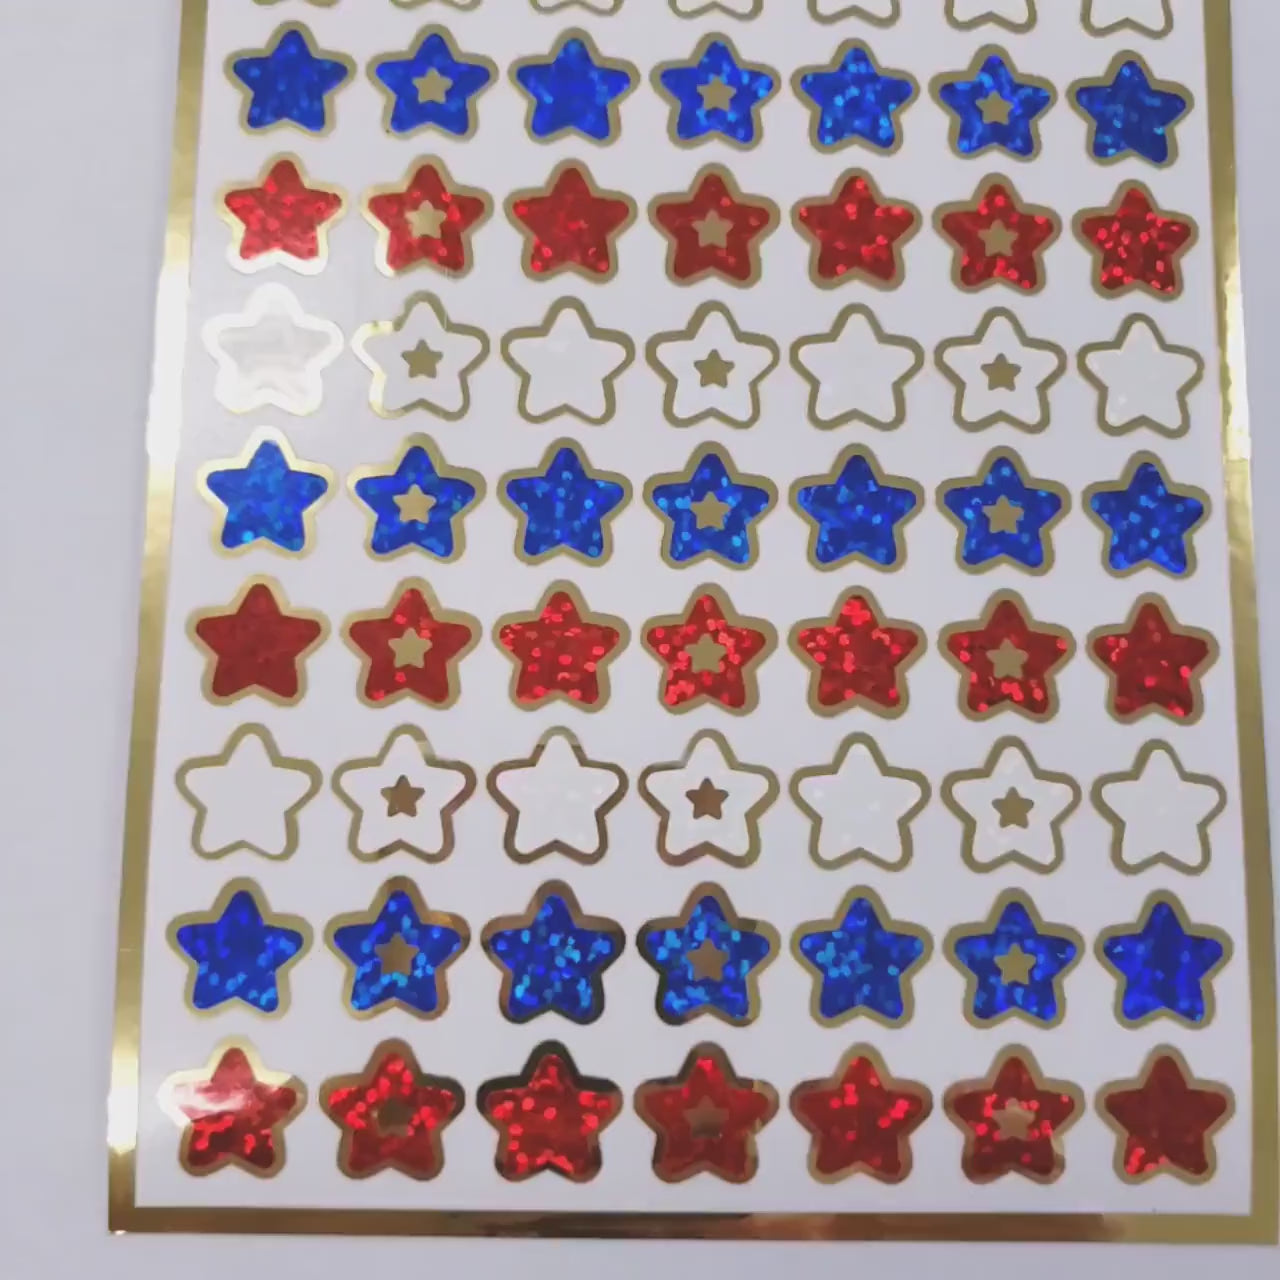 Star Stickers, set of 70 patriotic red, white, blue and gold stars for Memorial Day, July 4th, American Flag Decor, Glitter Sticker Sheet.